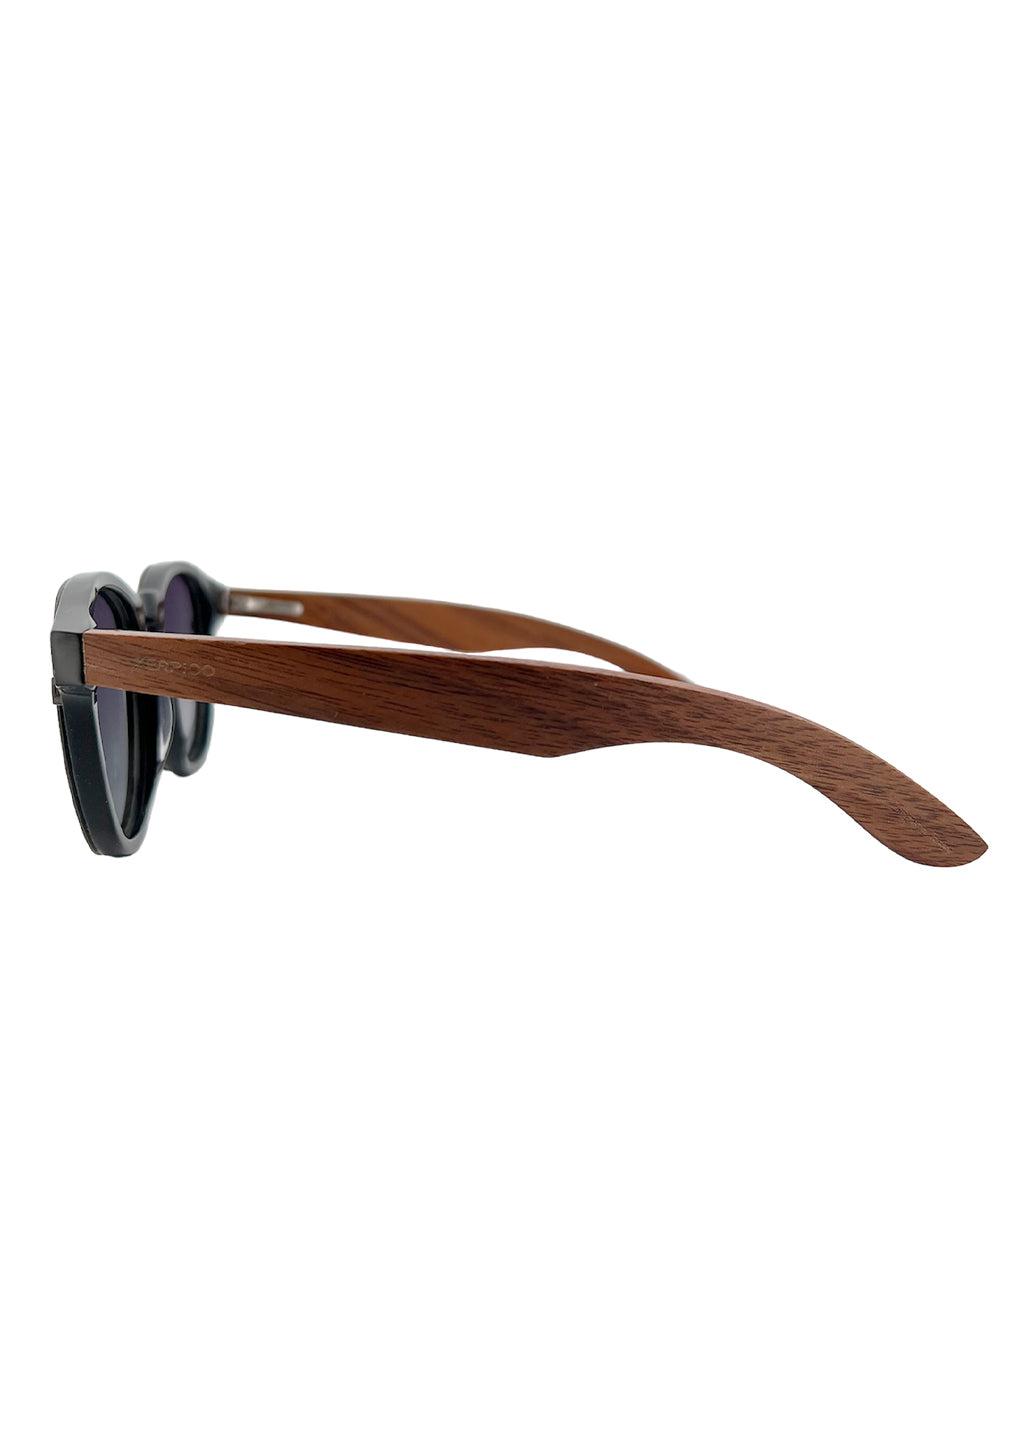 Our handmade Eyewood ReInvented Wooden and Acetate Sunglasses. This is our round style. Studio photo from the side.